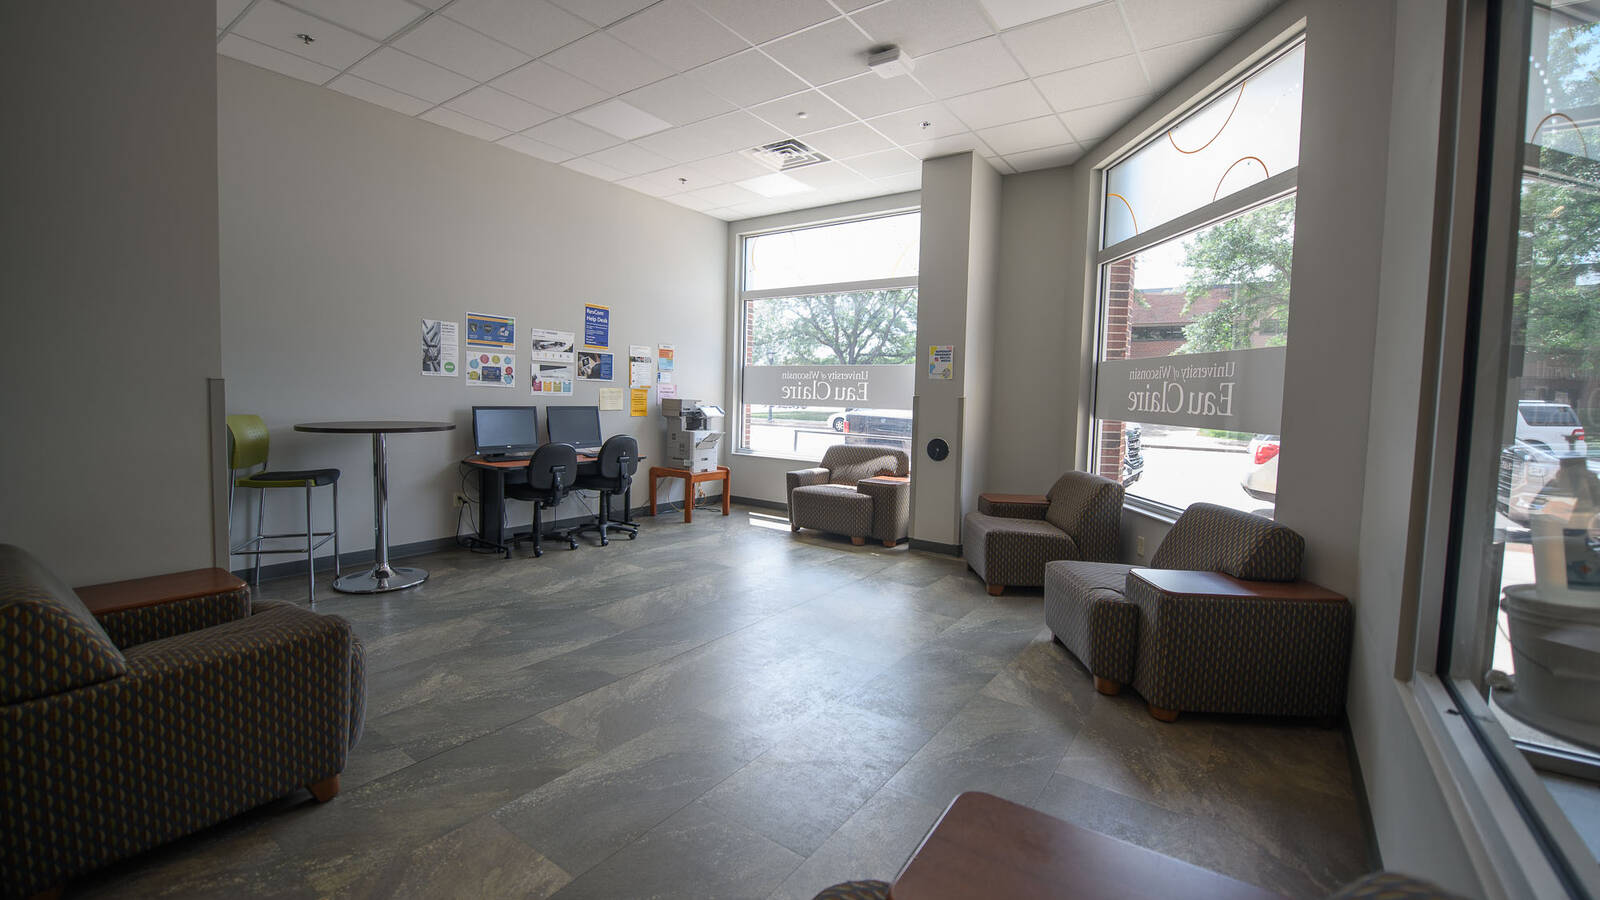 Lobby area of residence hall featuring two computers, an open space with armchairs and large windows